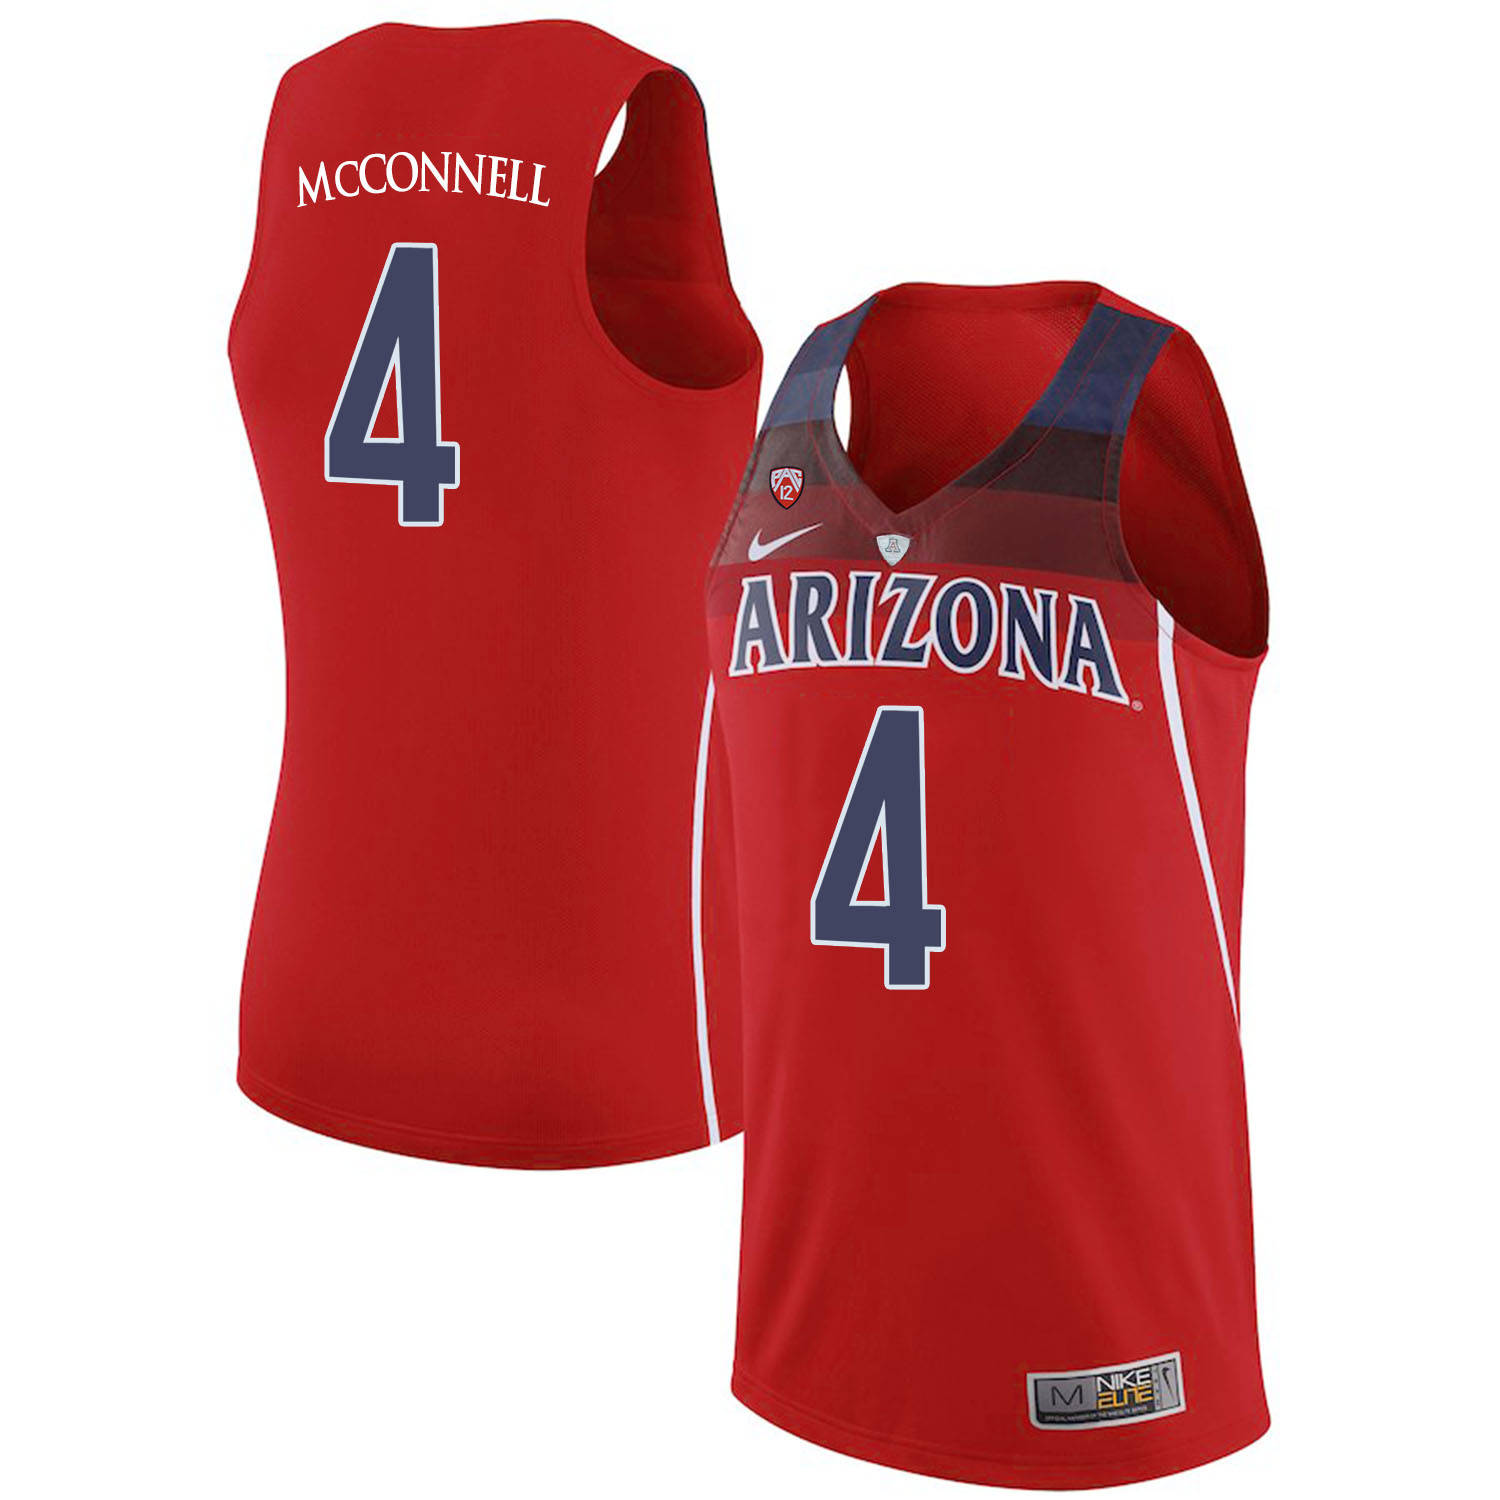 Arizona Wildcats 4 T.J. McConnell Red College Basketball Jersey